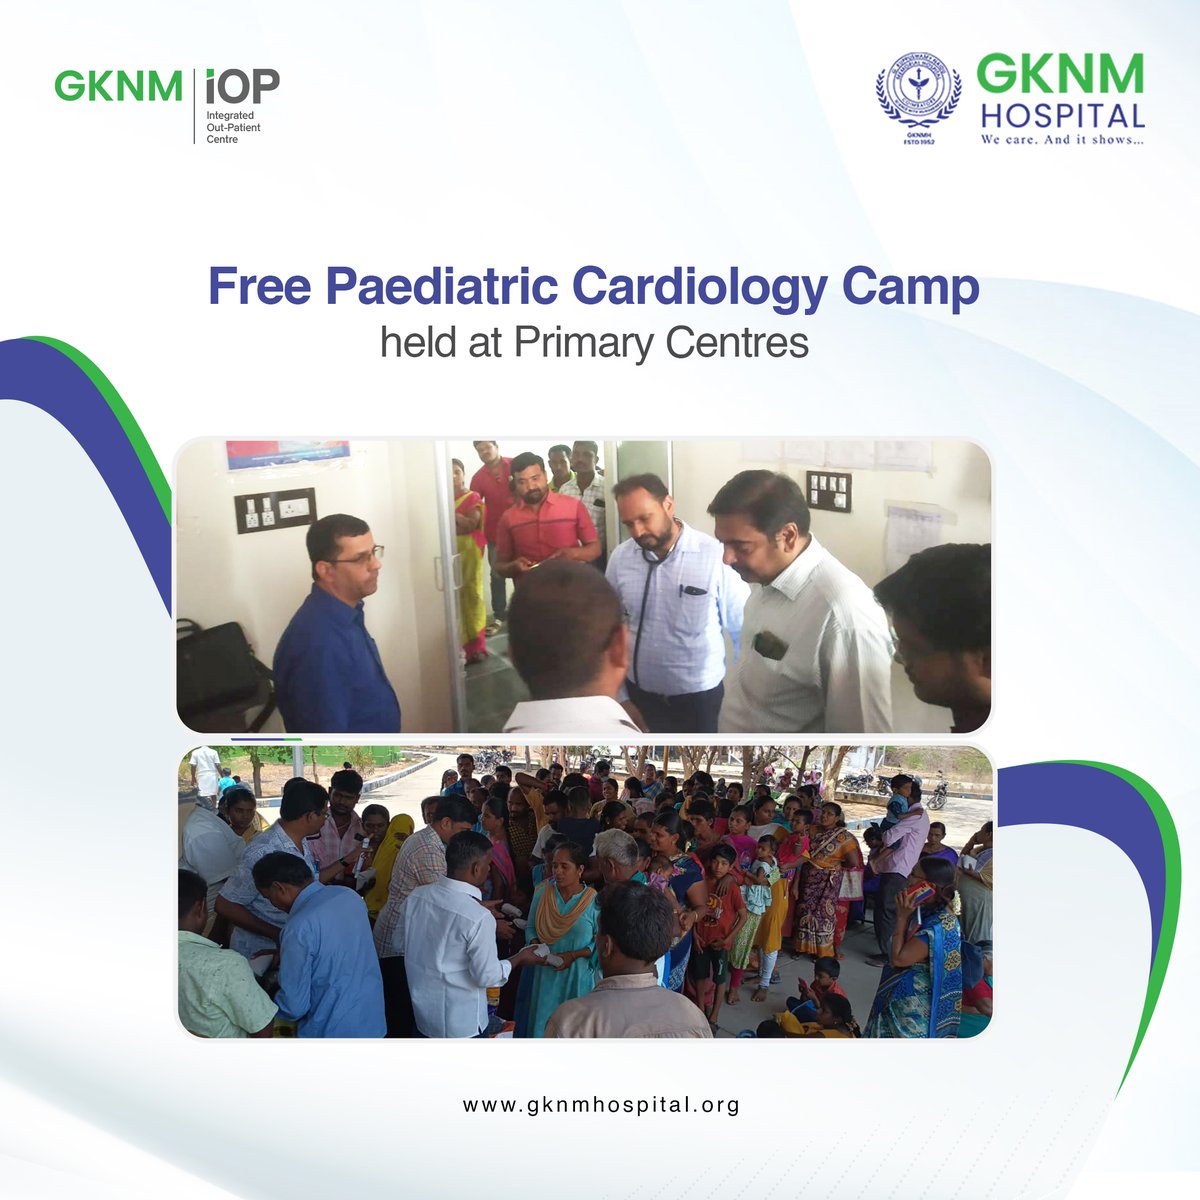 GKNM Hospital, in collaboration with DPH and the Ekam Foundation, recently organized Pediatric Cardiology Screening Camps at Primary Health Centers in Velliyanai (Karur district) and Kallimandayam (Ottanchatram Taluk). #PediatricCardiology #GKNMIOP #GKNM #GKNMH #GKNMHospital